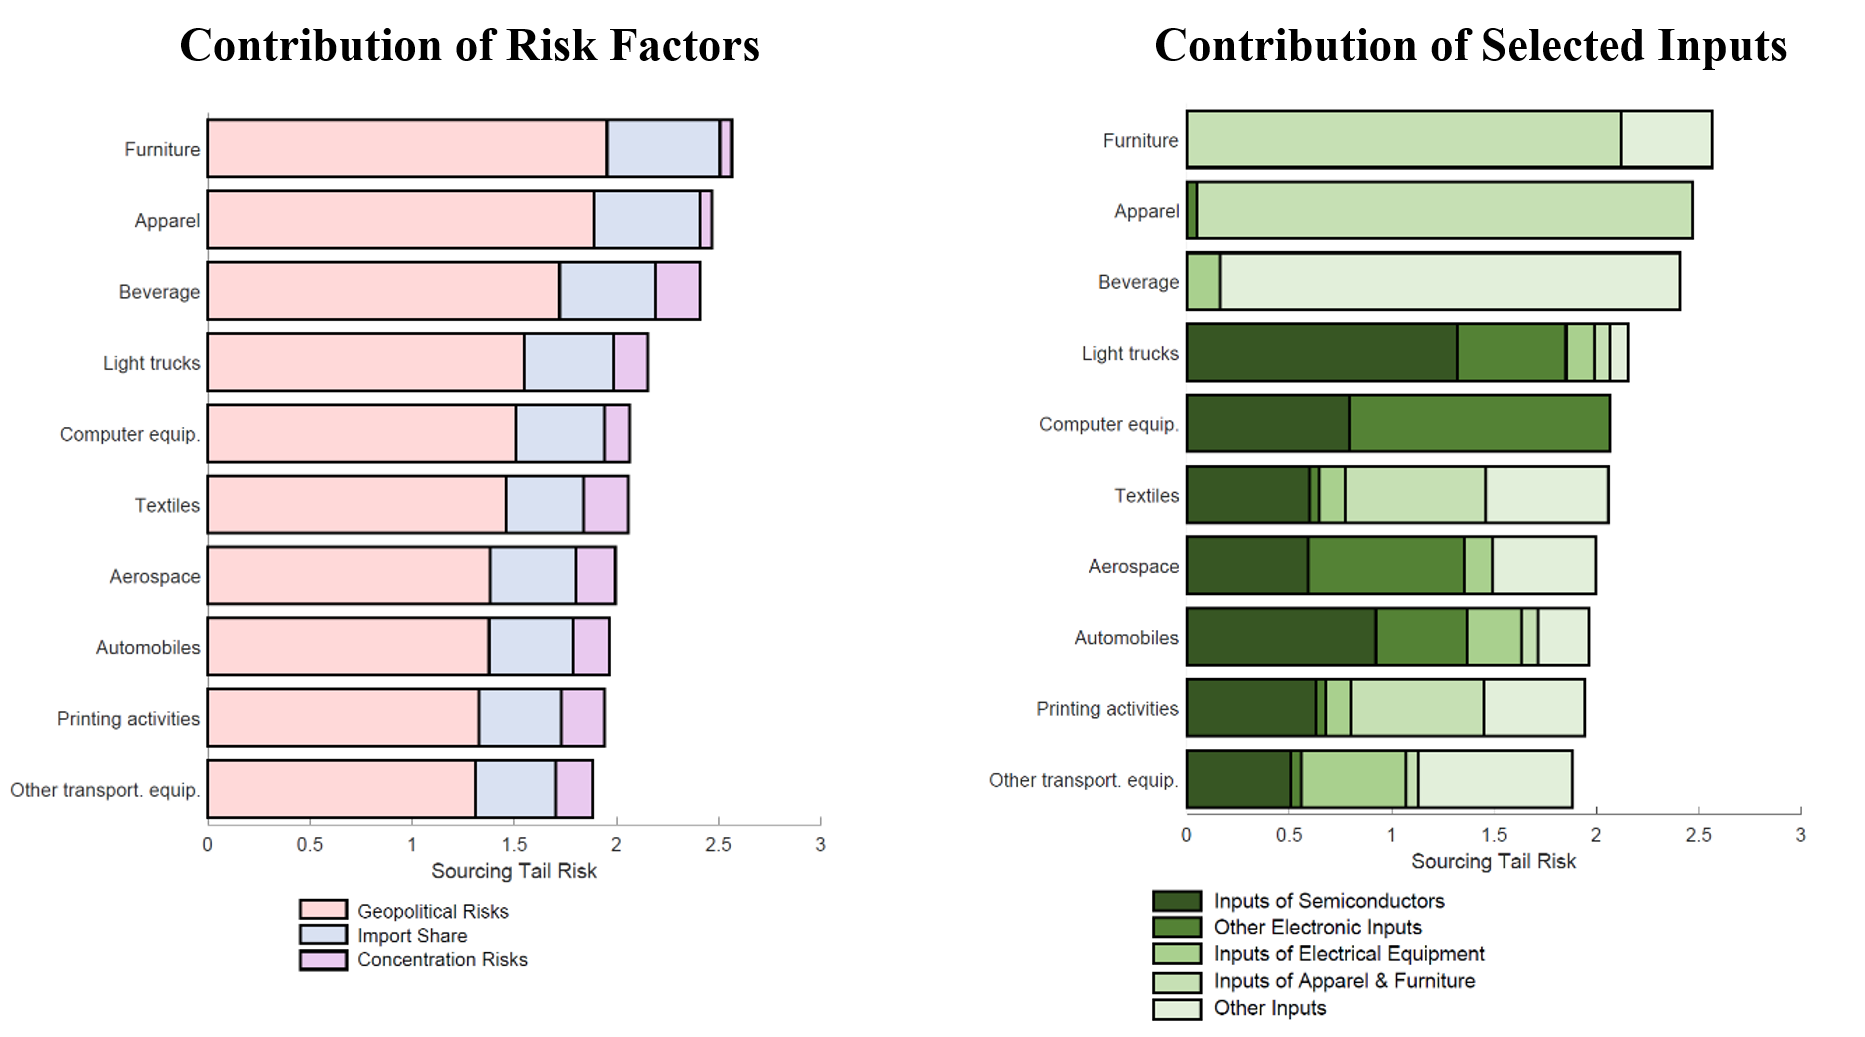 Figure 7. Industry Sourcing Tail Risk. See accessible link for data.